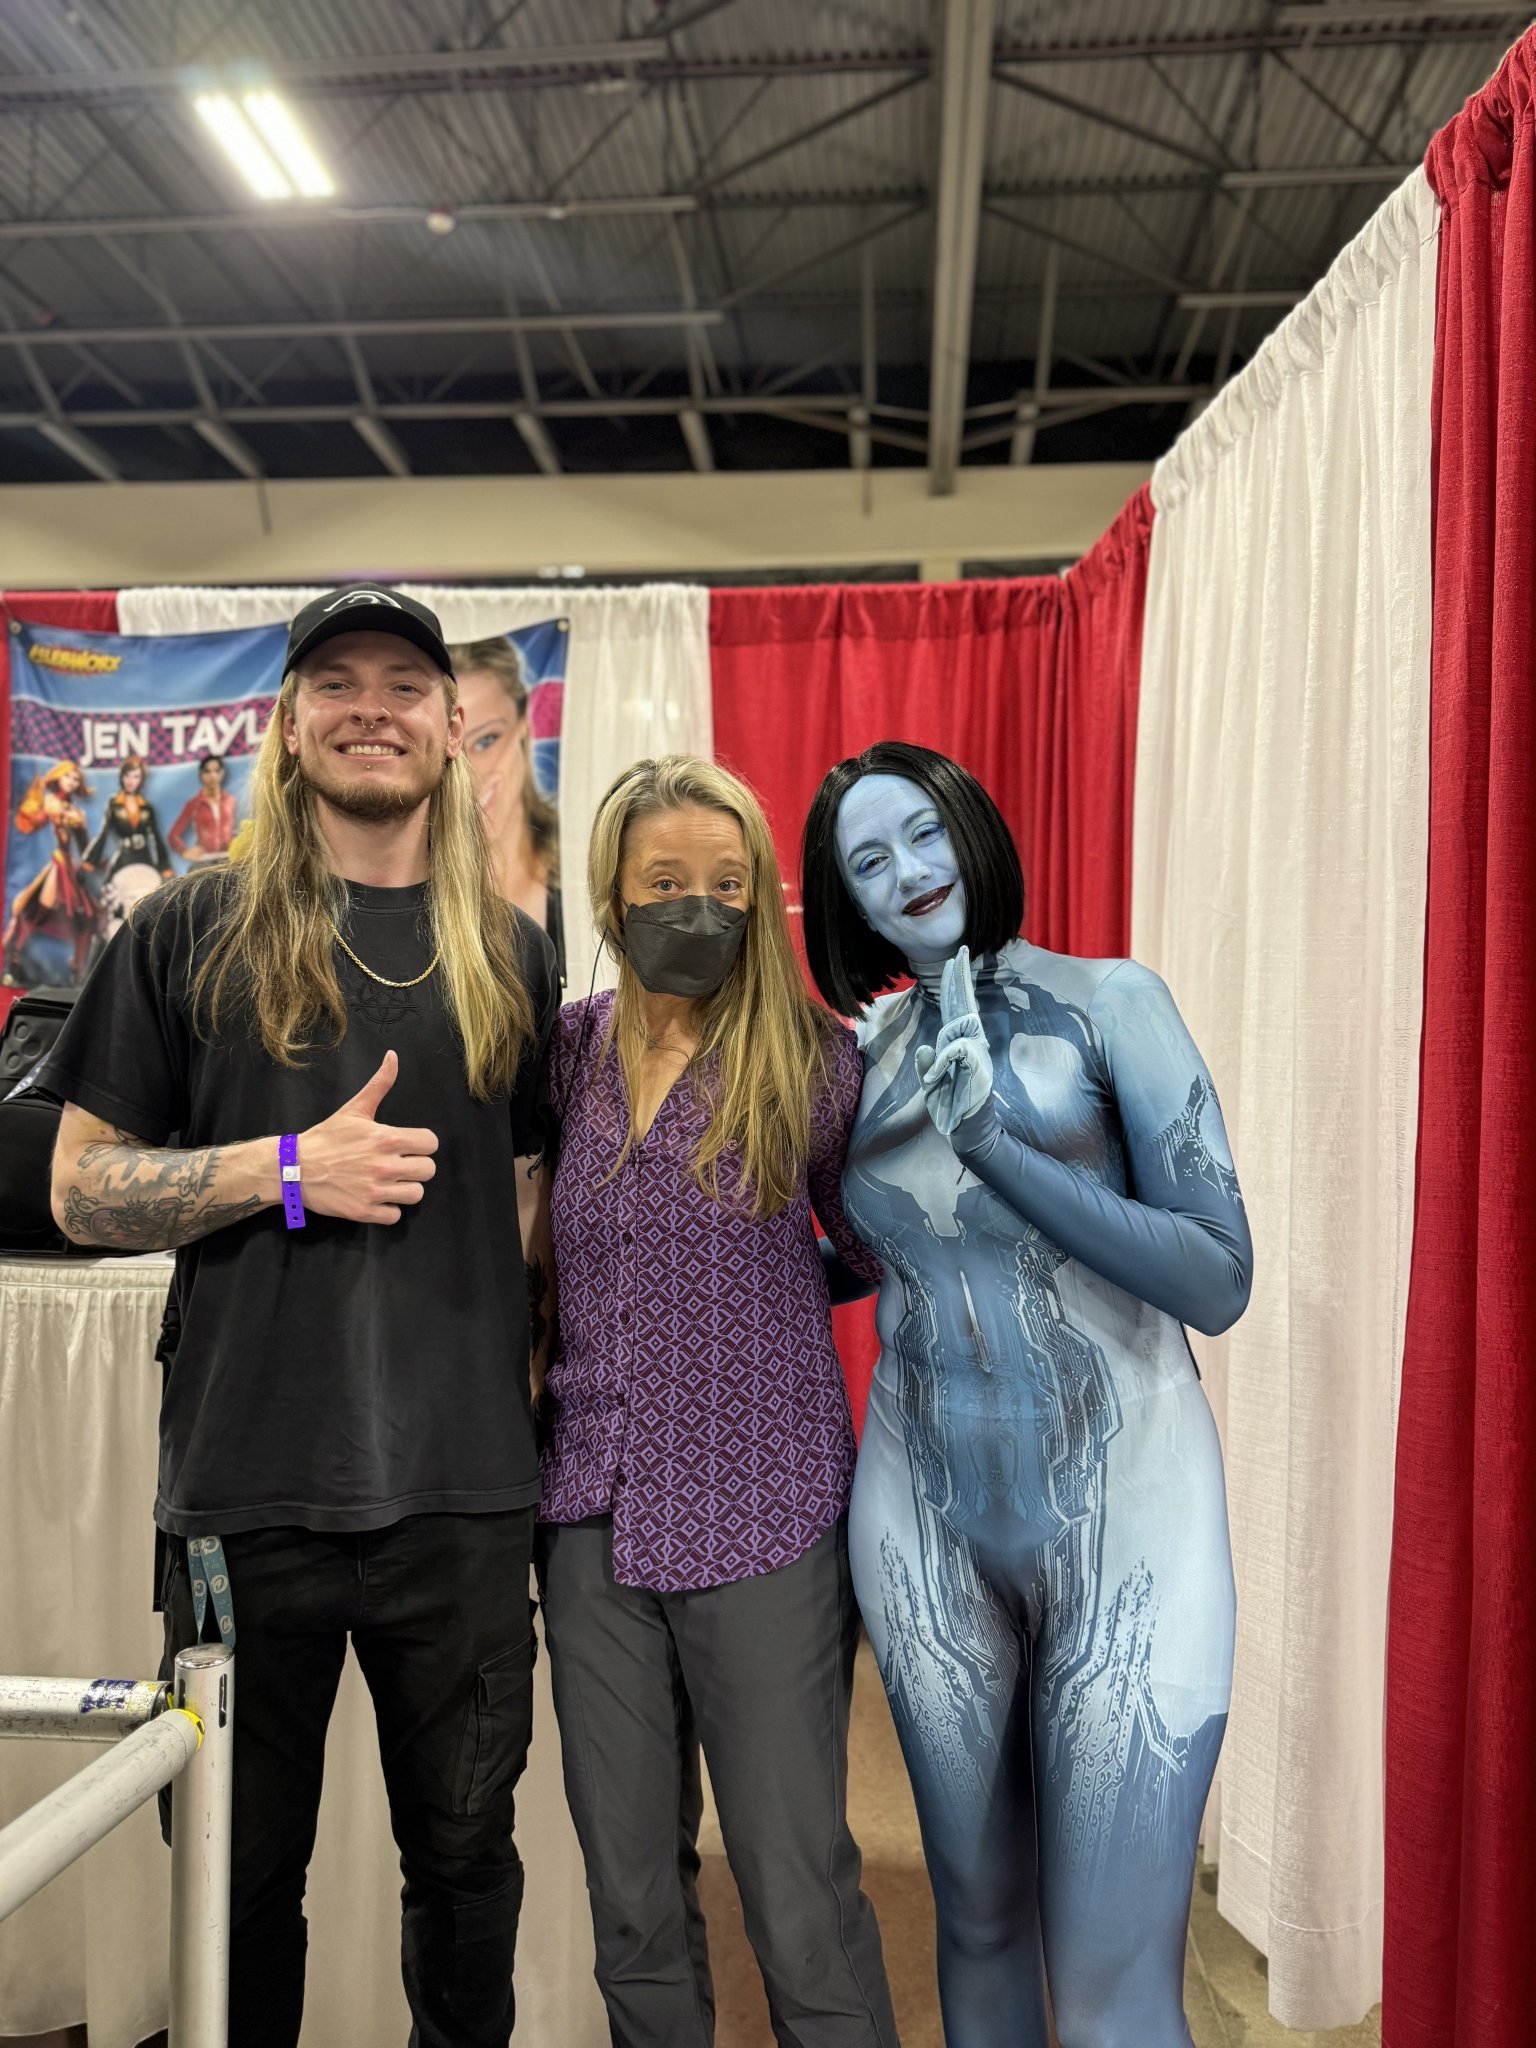 Photo of LaSinity cosplaying as Cortana with her partner "Womp" and Jen Taylor